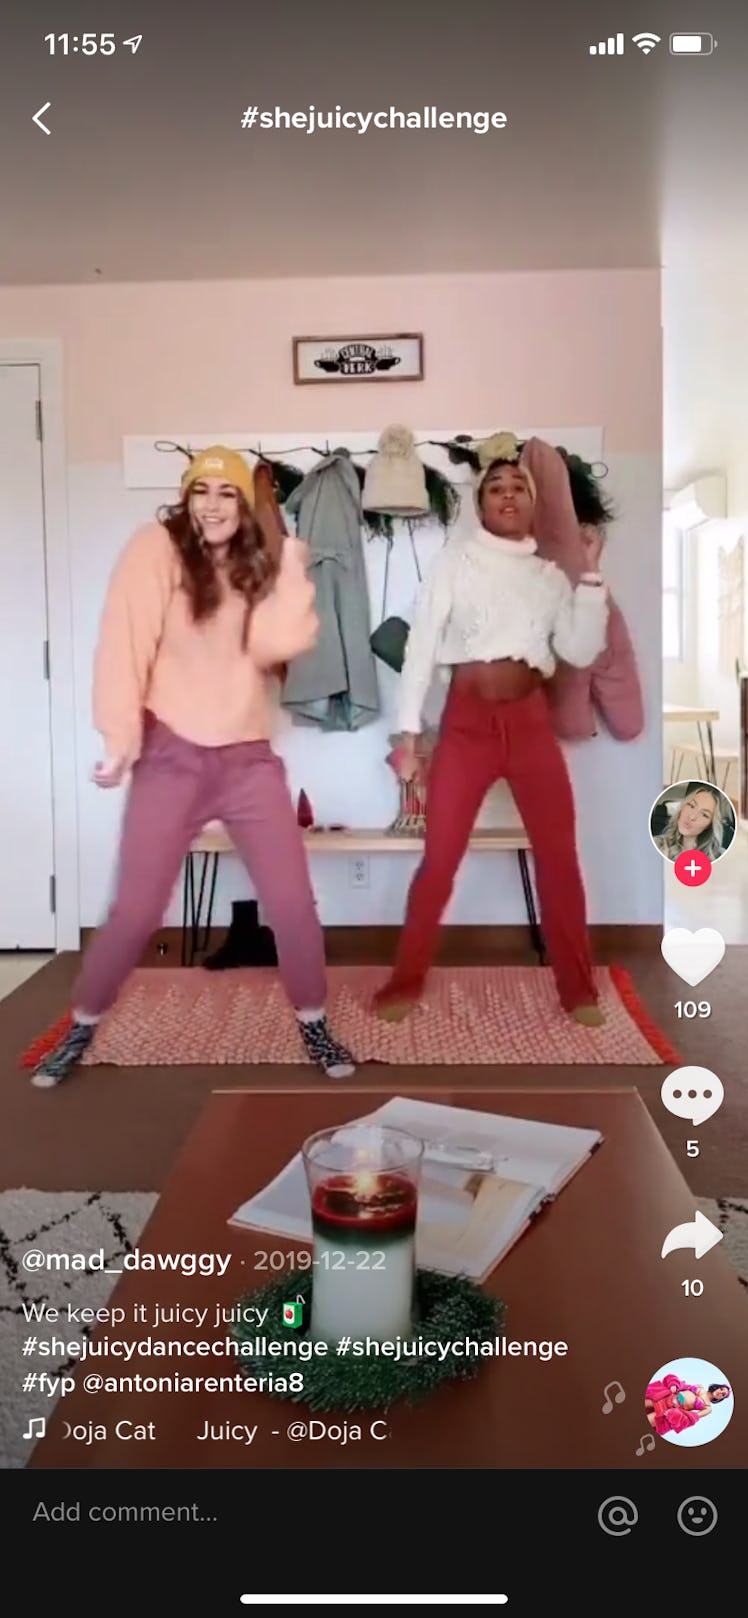 Two best friends do the #shejuicychallenge on TikTok in a colorful room.